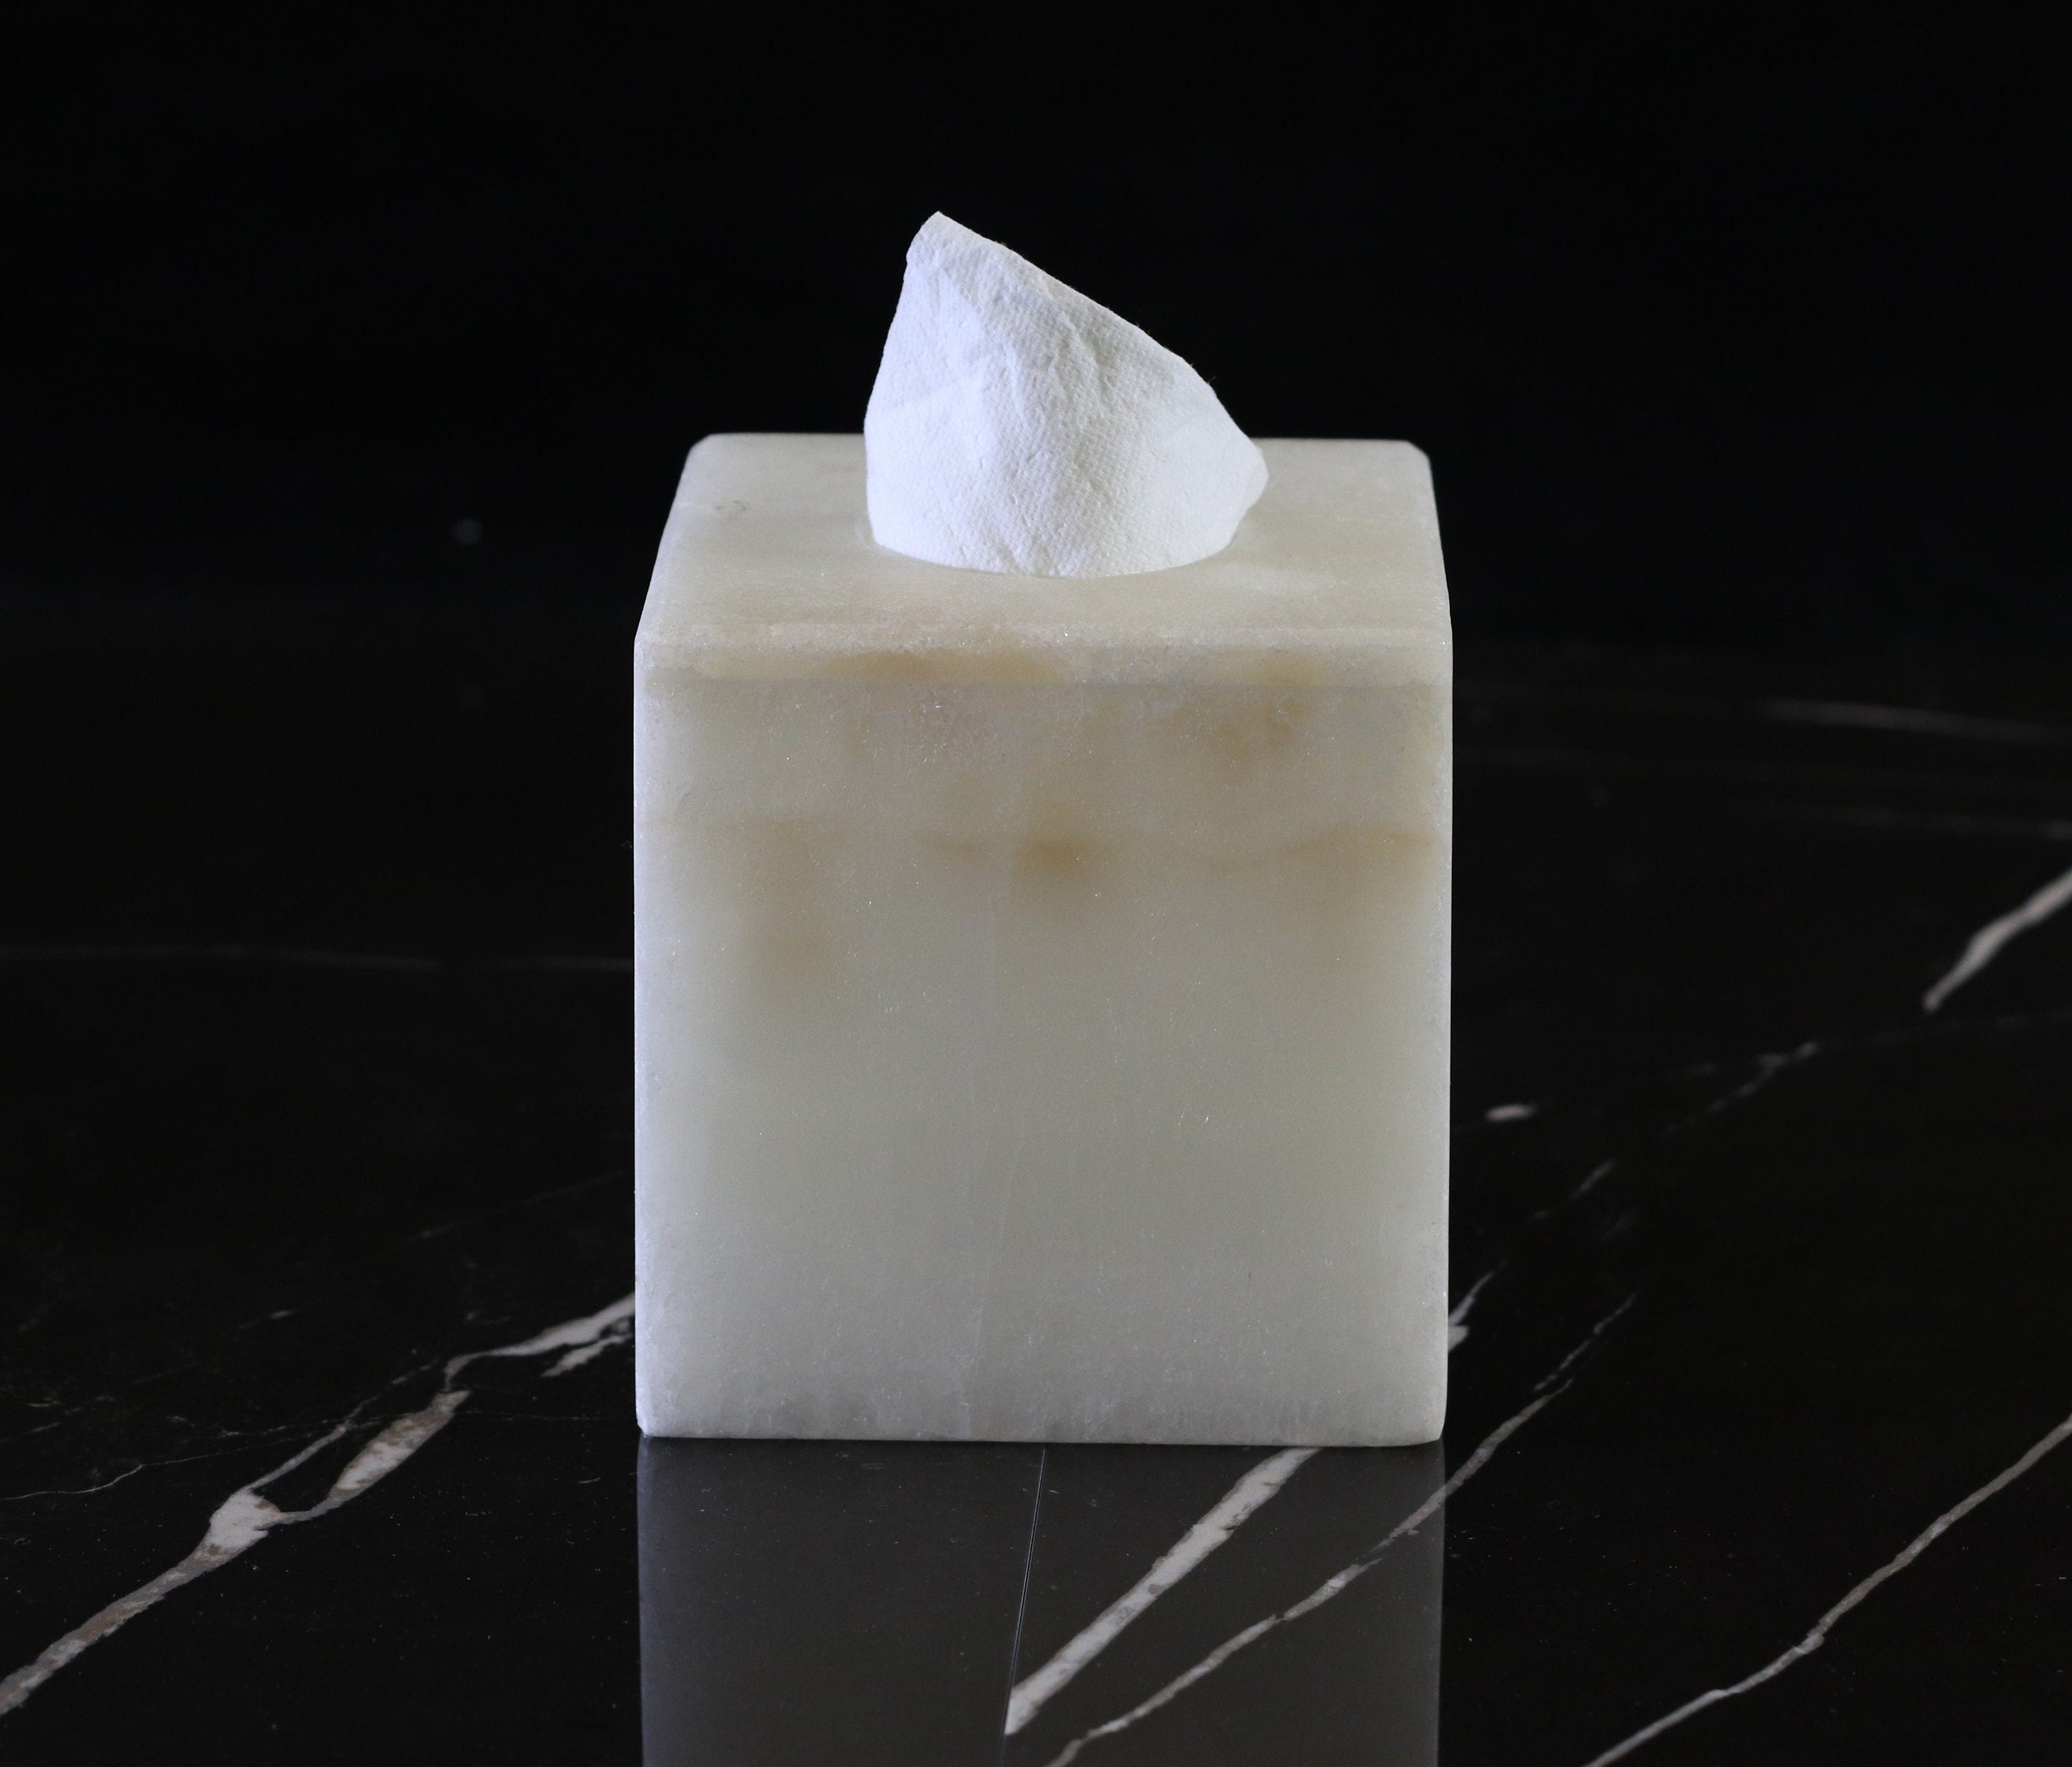 White onyx stone tissue box cover. Hand hewn from a single block of stone. Handmade in Mexico. Ships from the USA. Buy now at www.felipeandgrace.com. 